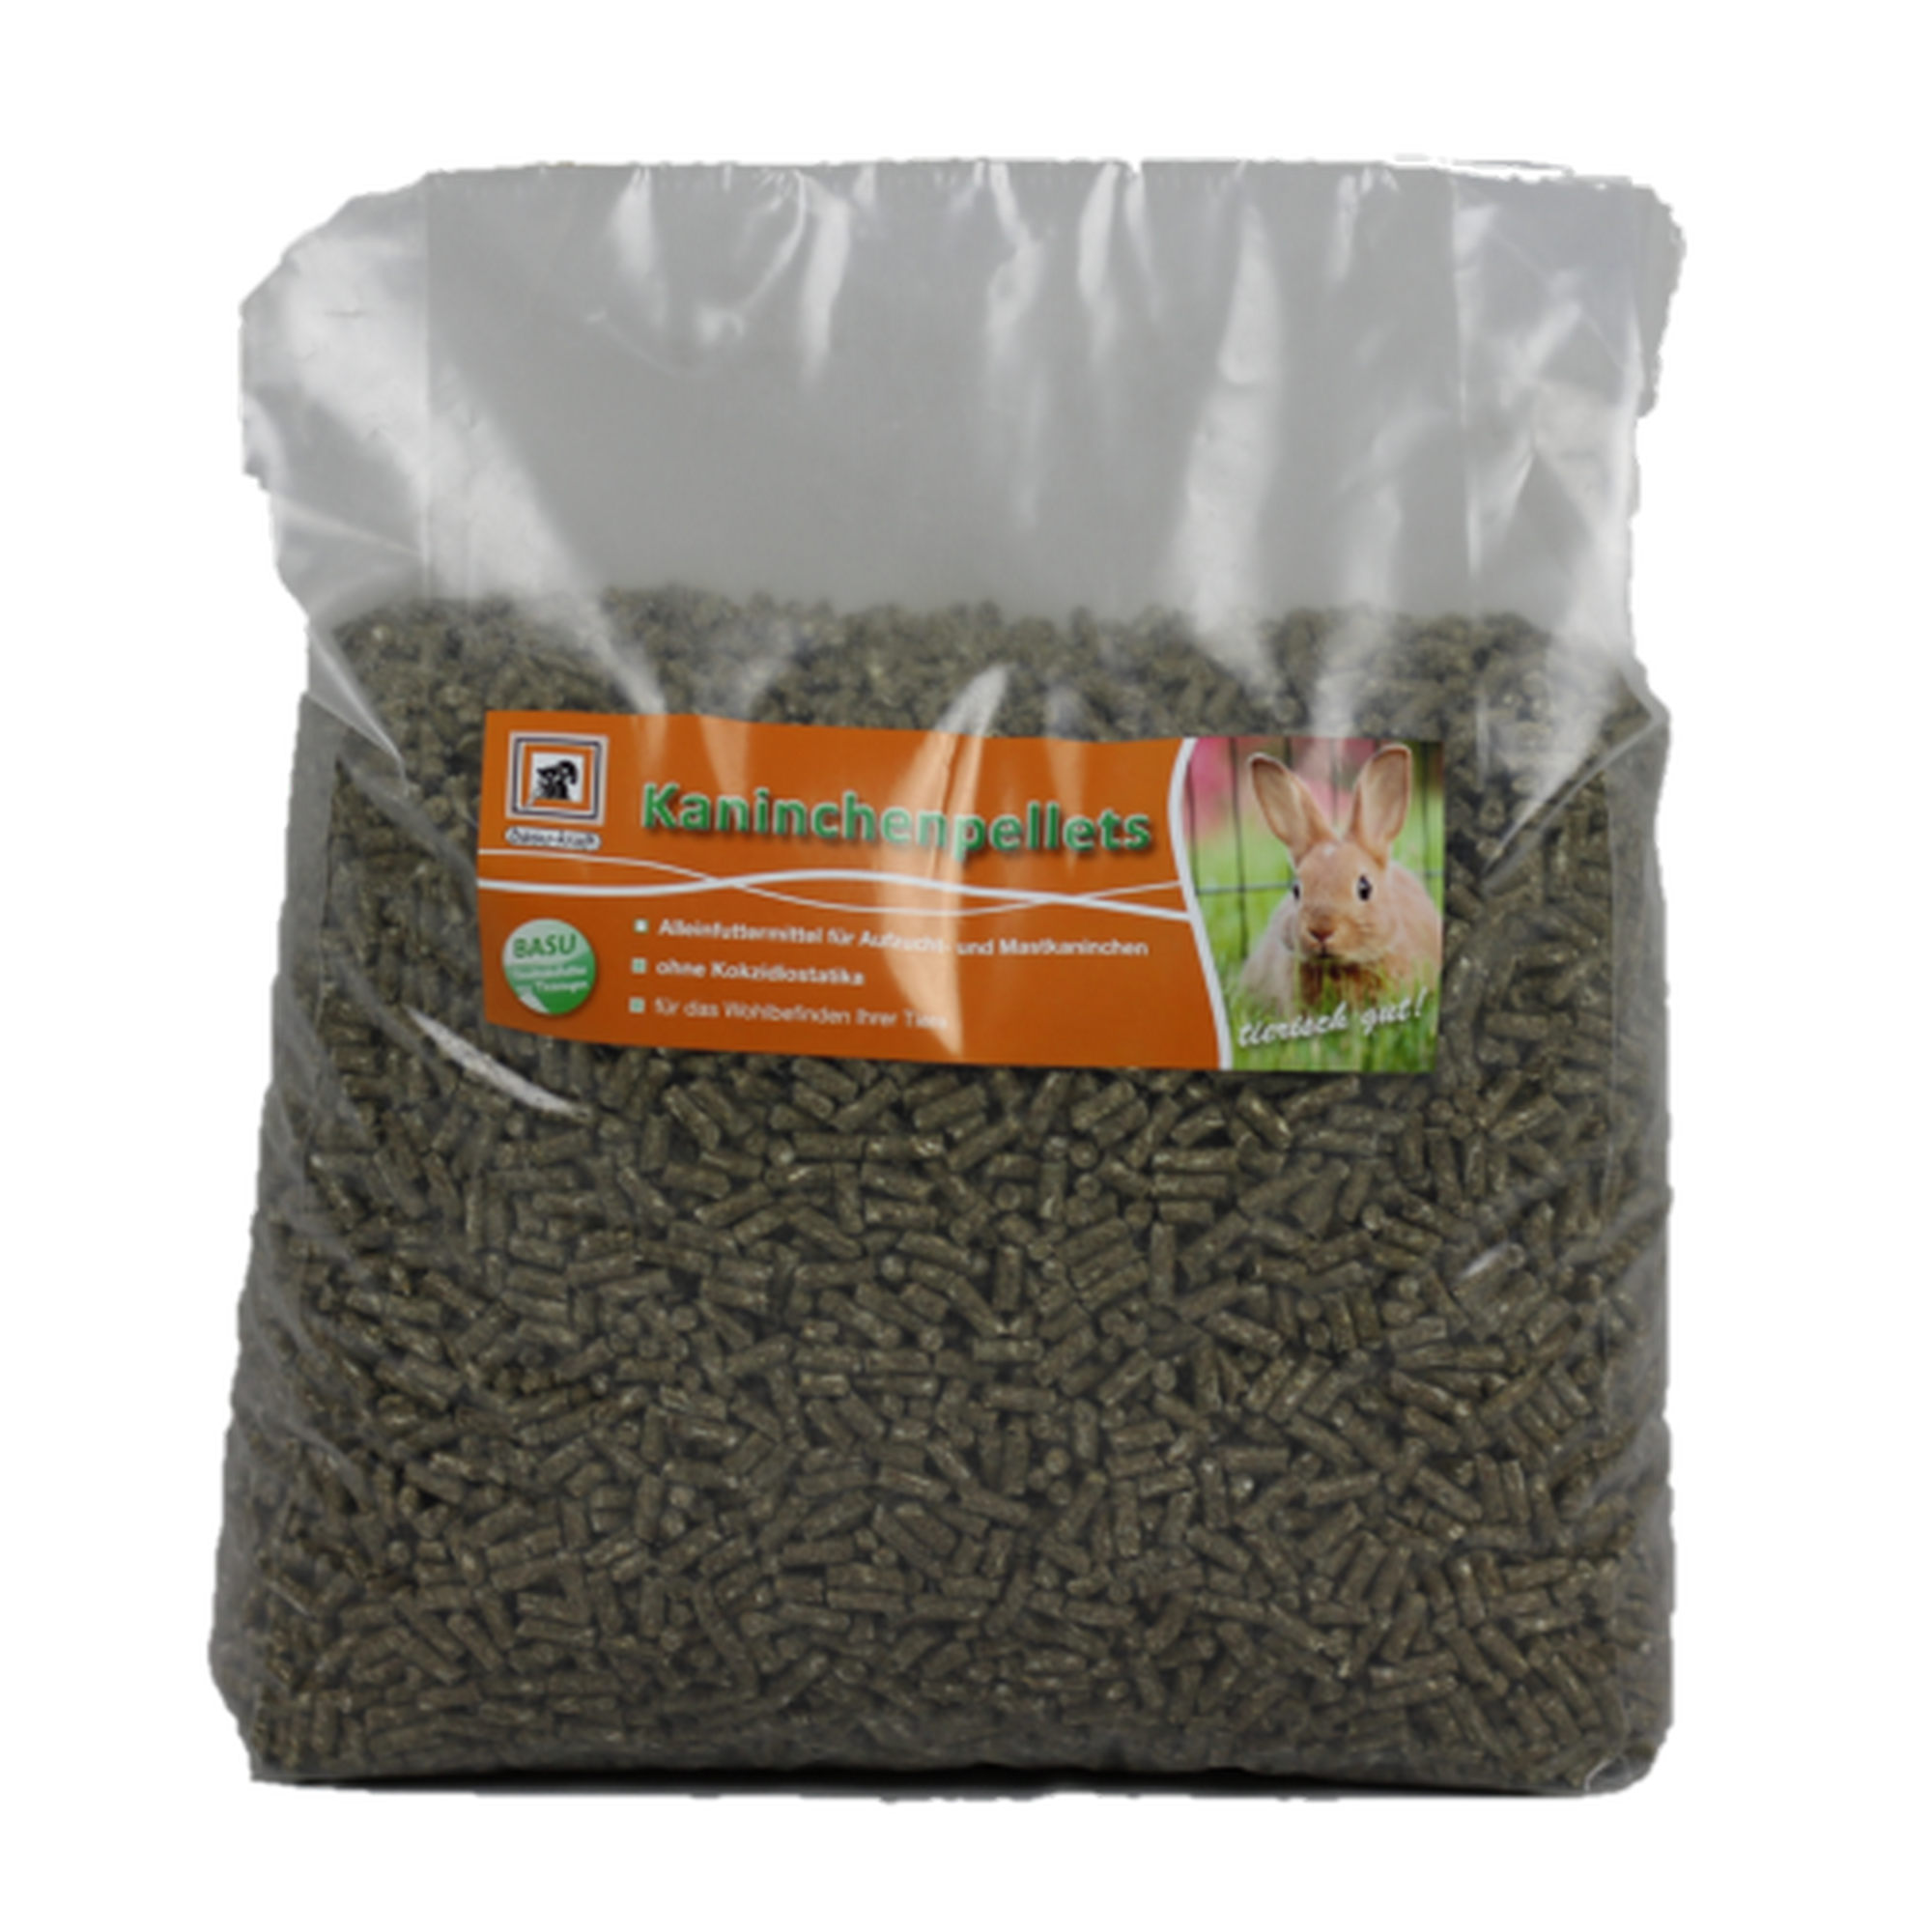 Kaninchenfutter 7 kg + product picture